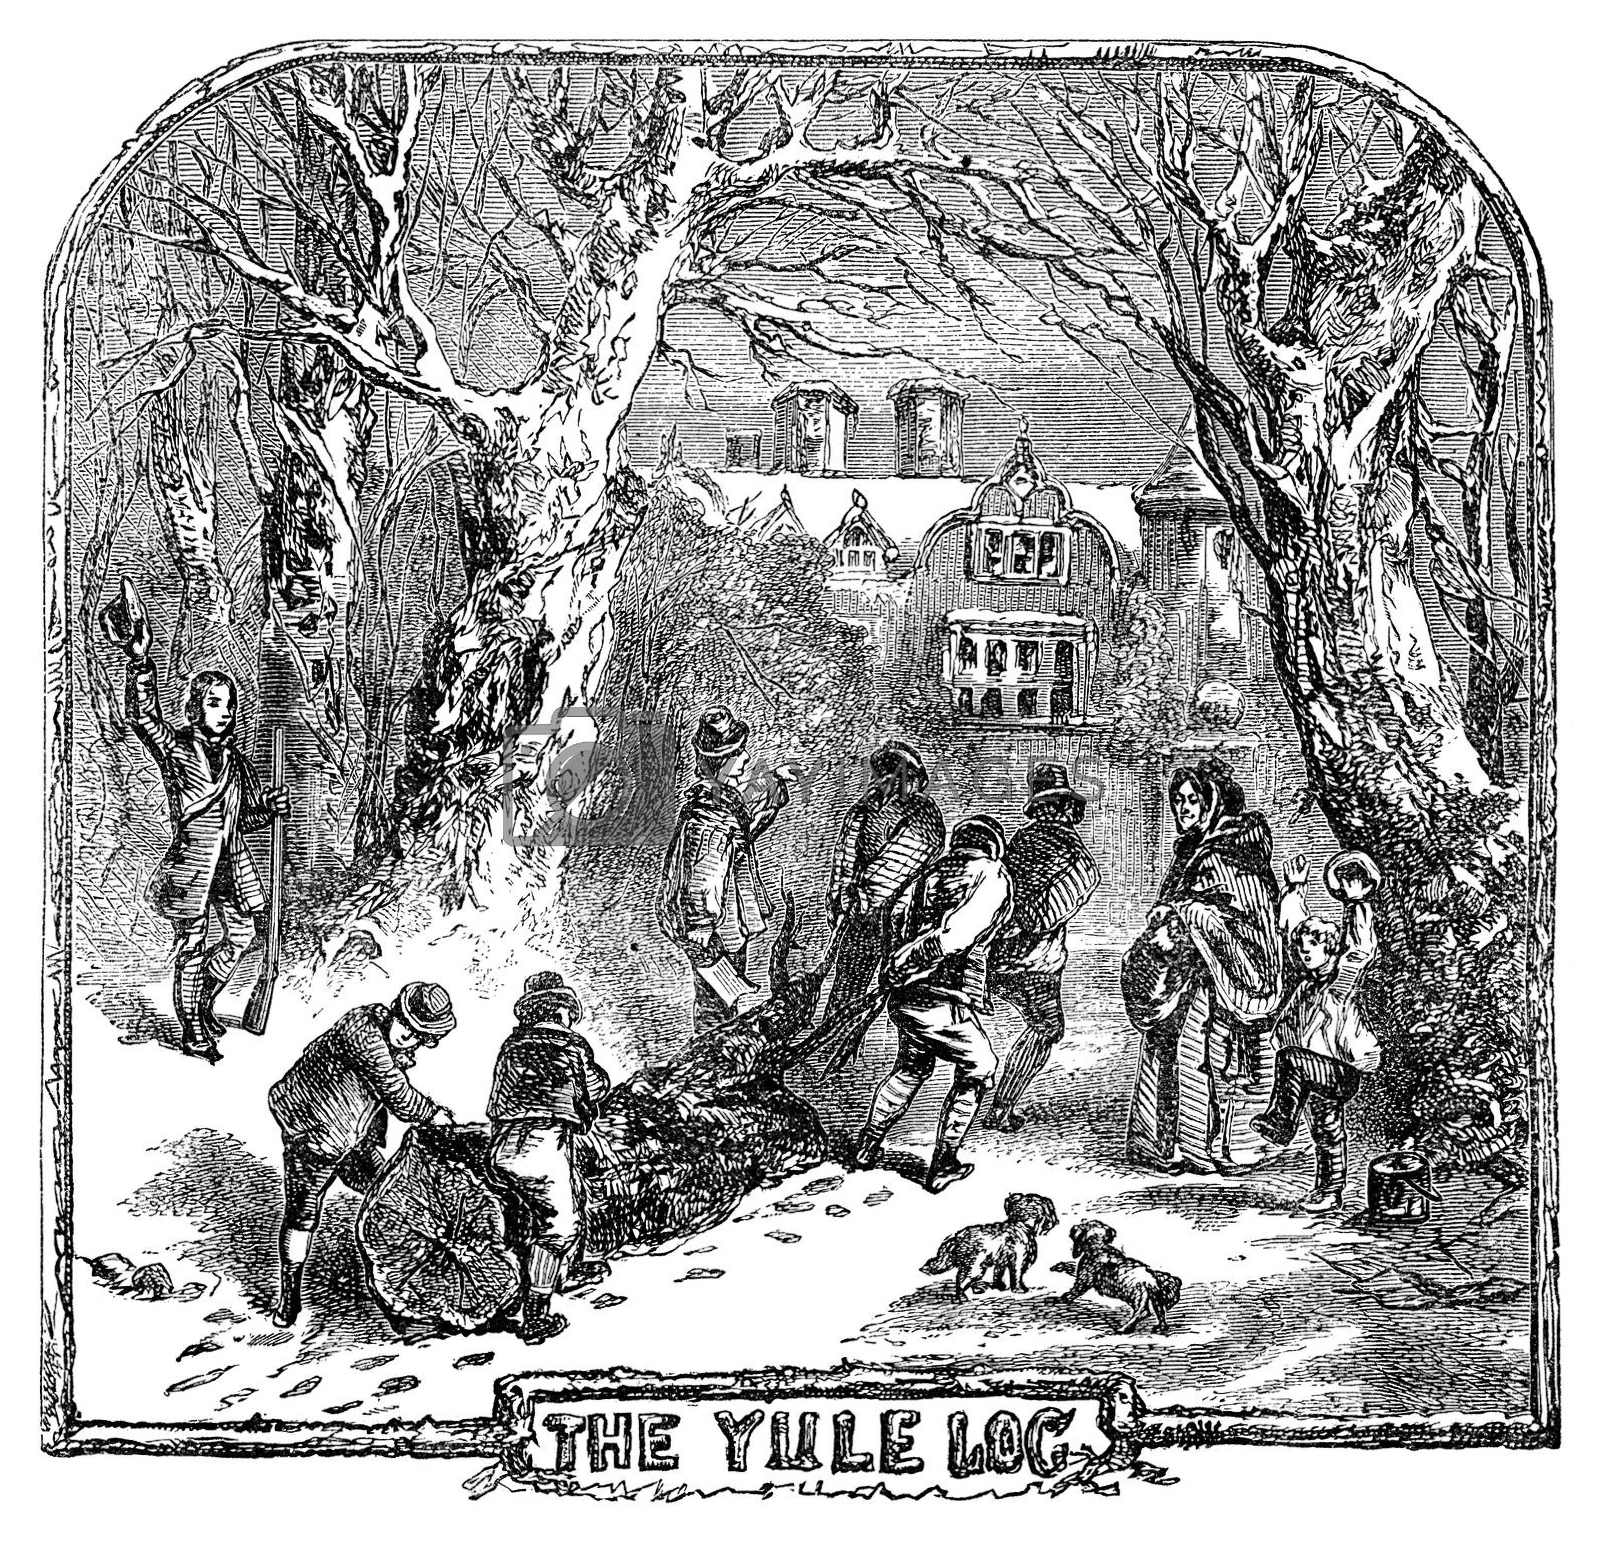 hauling of the yule log, from The Book of Days (1832), p. 734, by Robert Chambers, public domain